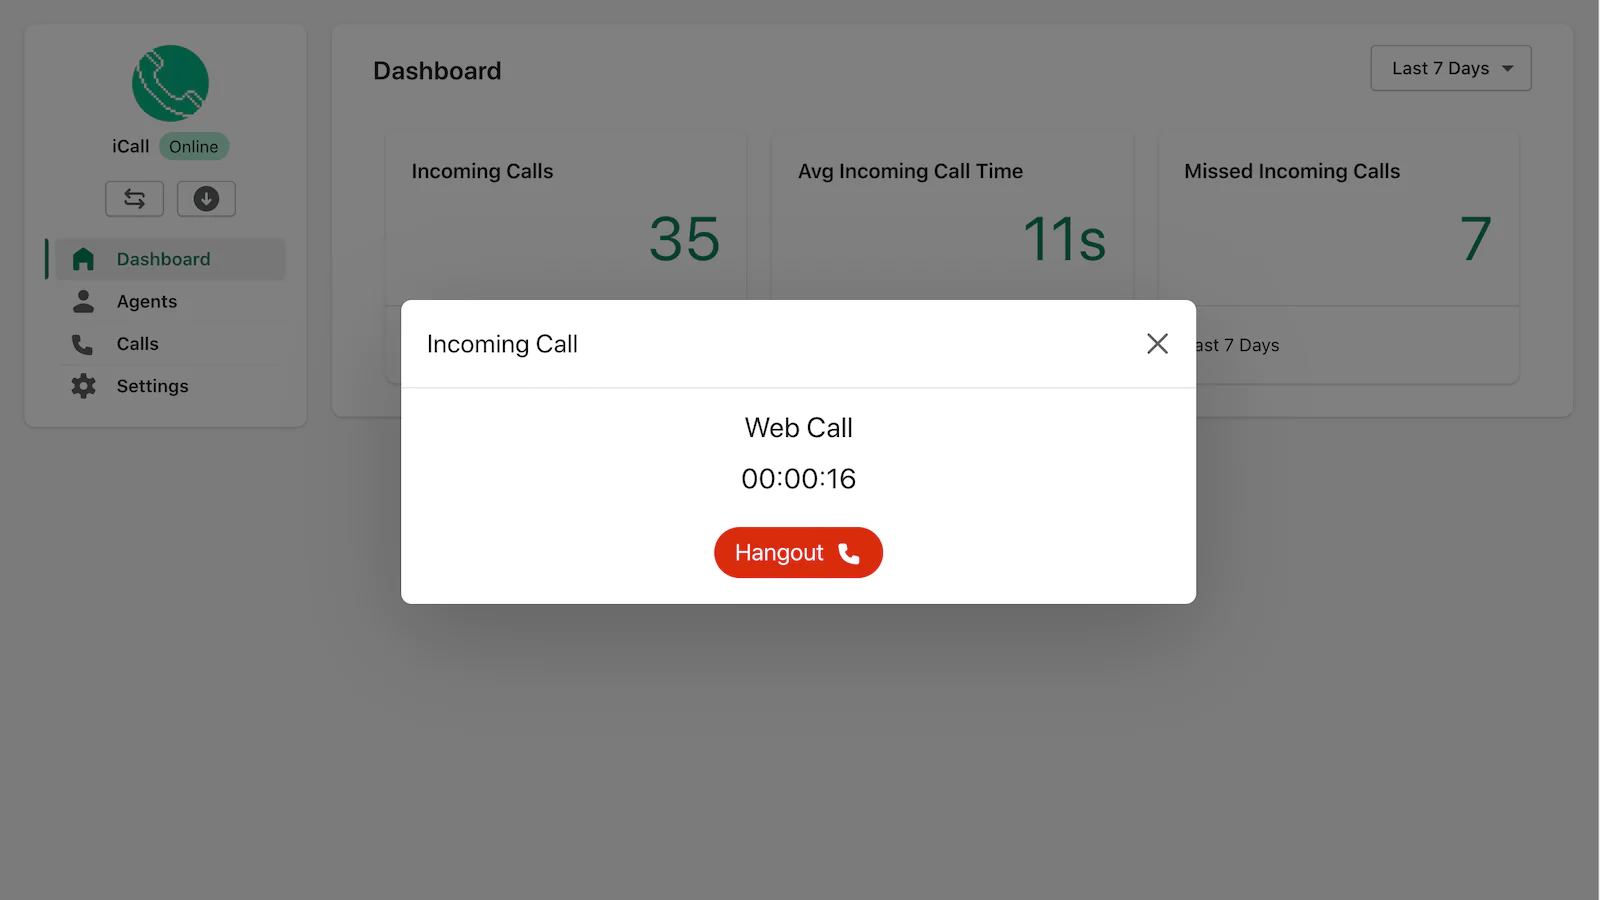 icall-web-call-and-call-button-app-dashboard